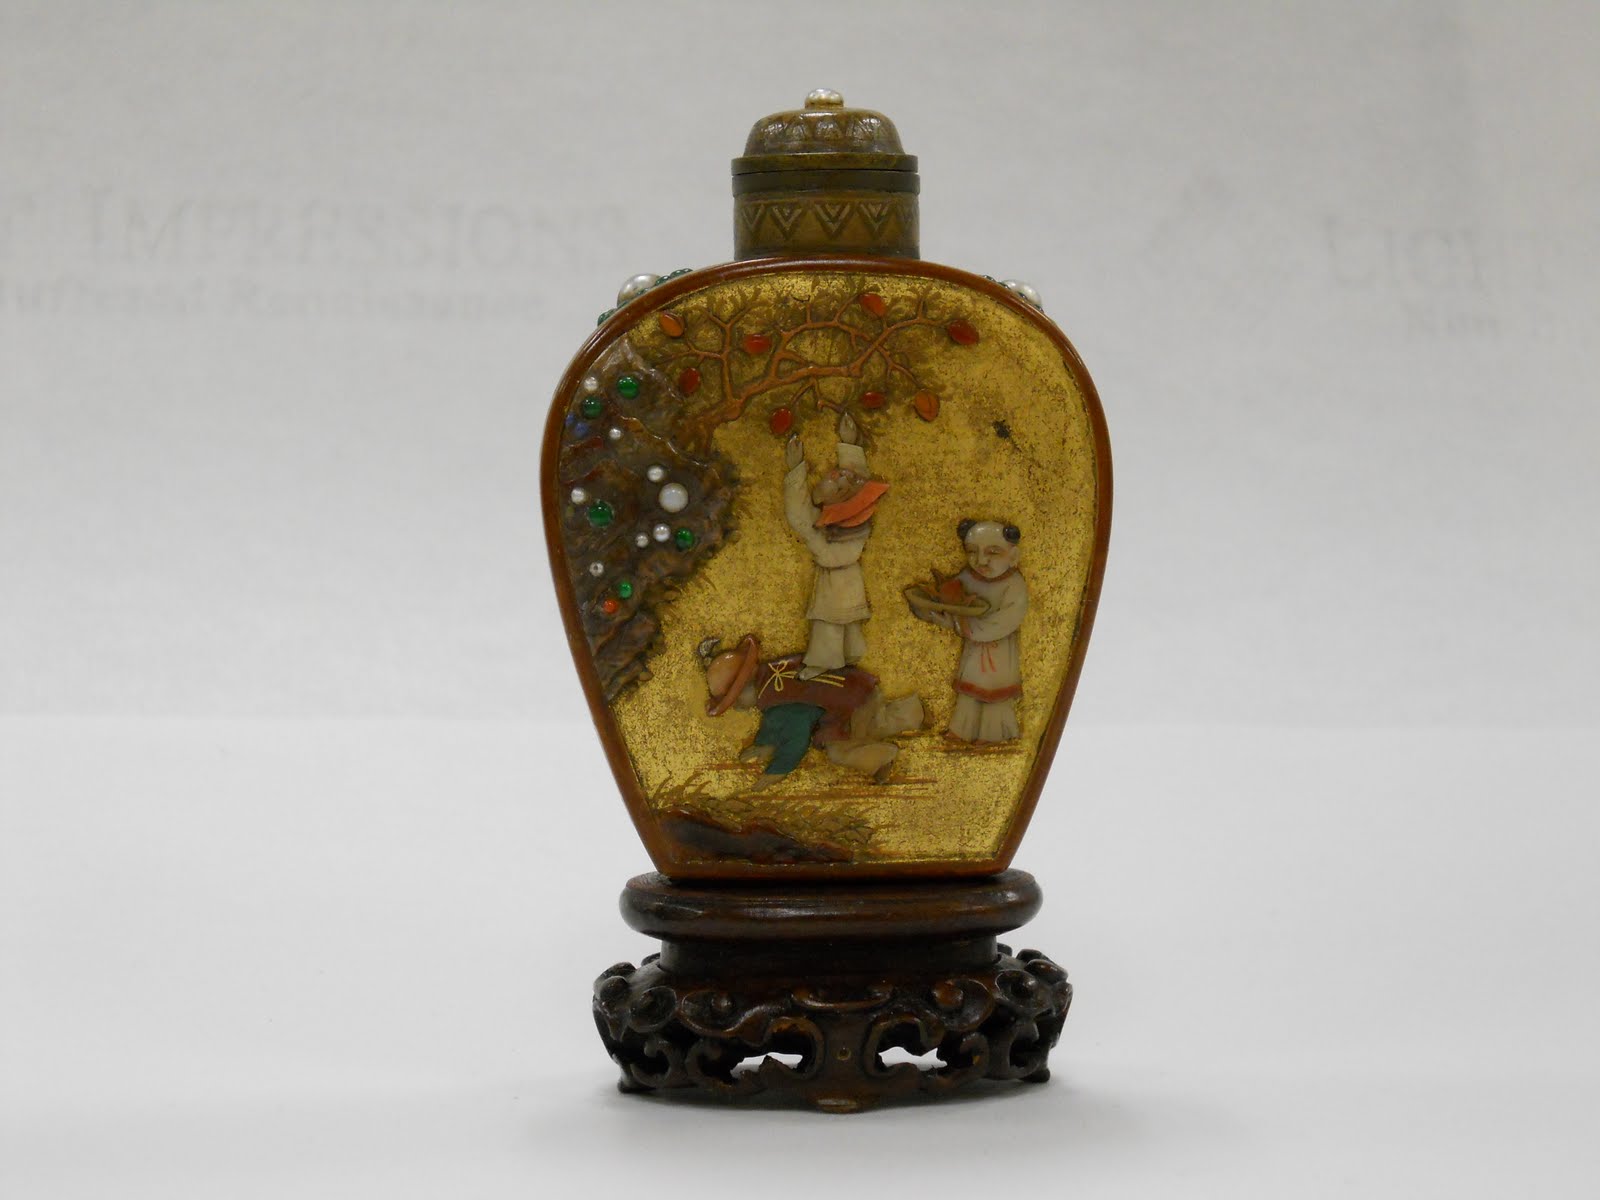 Rare gold lacquer and pietra dura bottle made with amber lacquer, with a tessellated gold ground depicting a scene of three small boys picking peaches.